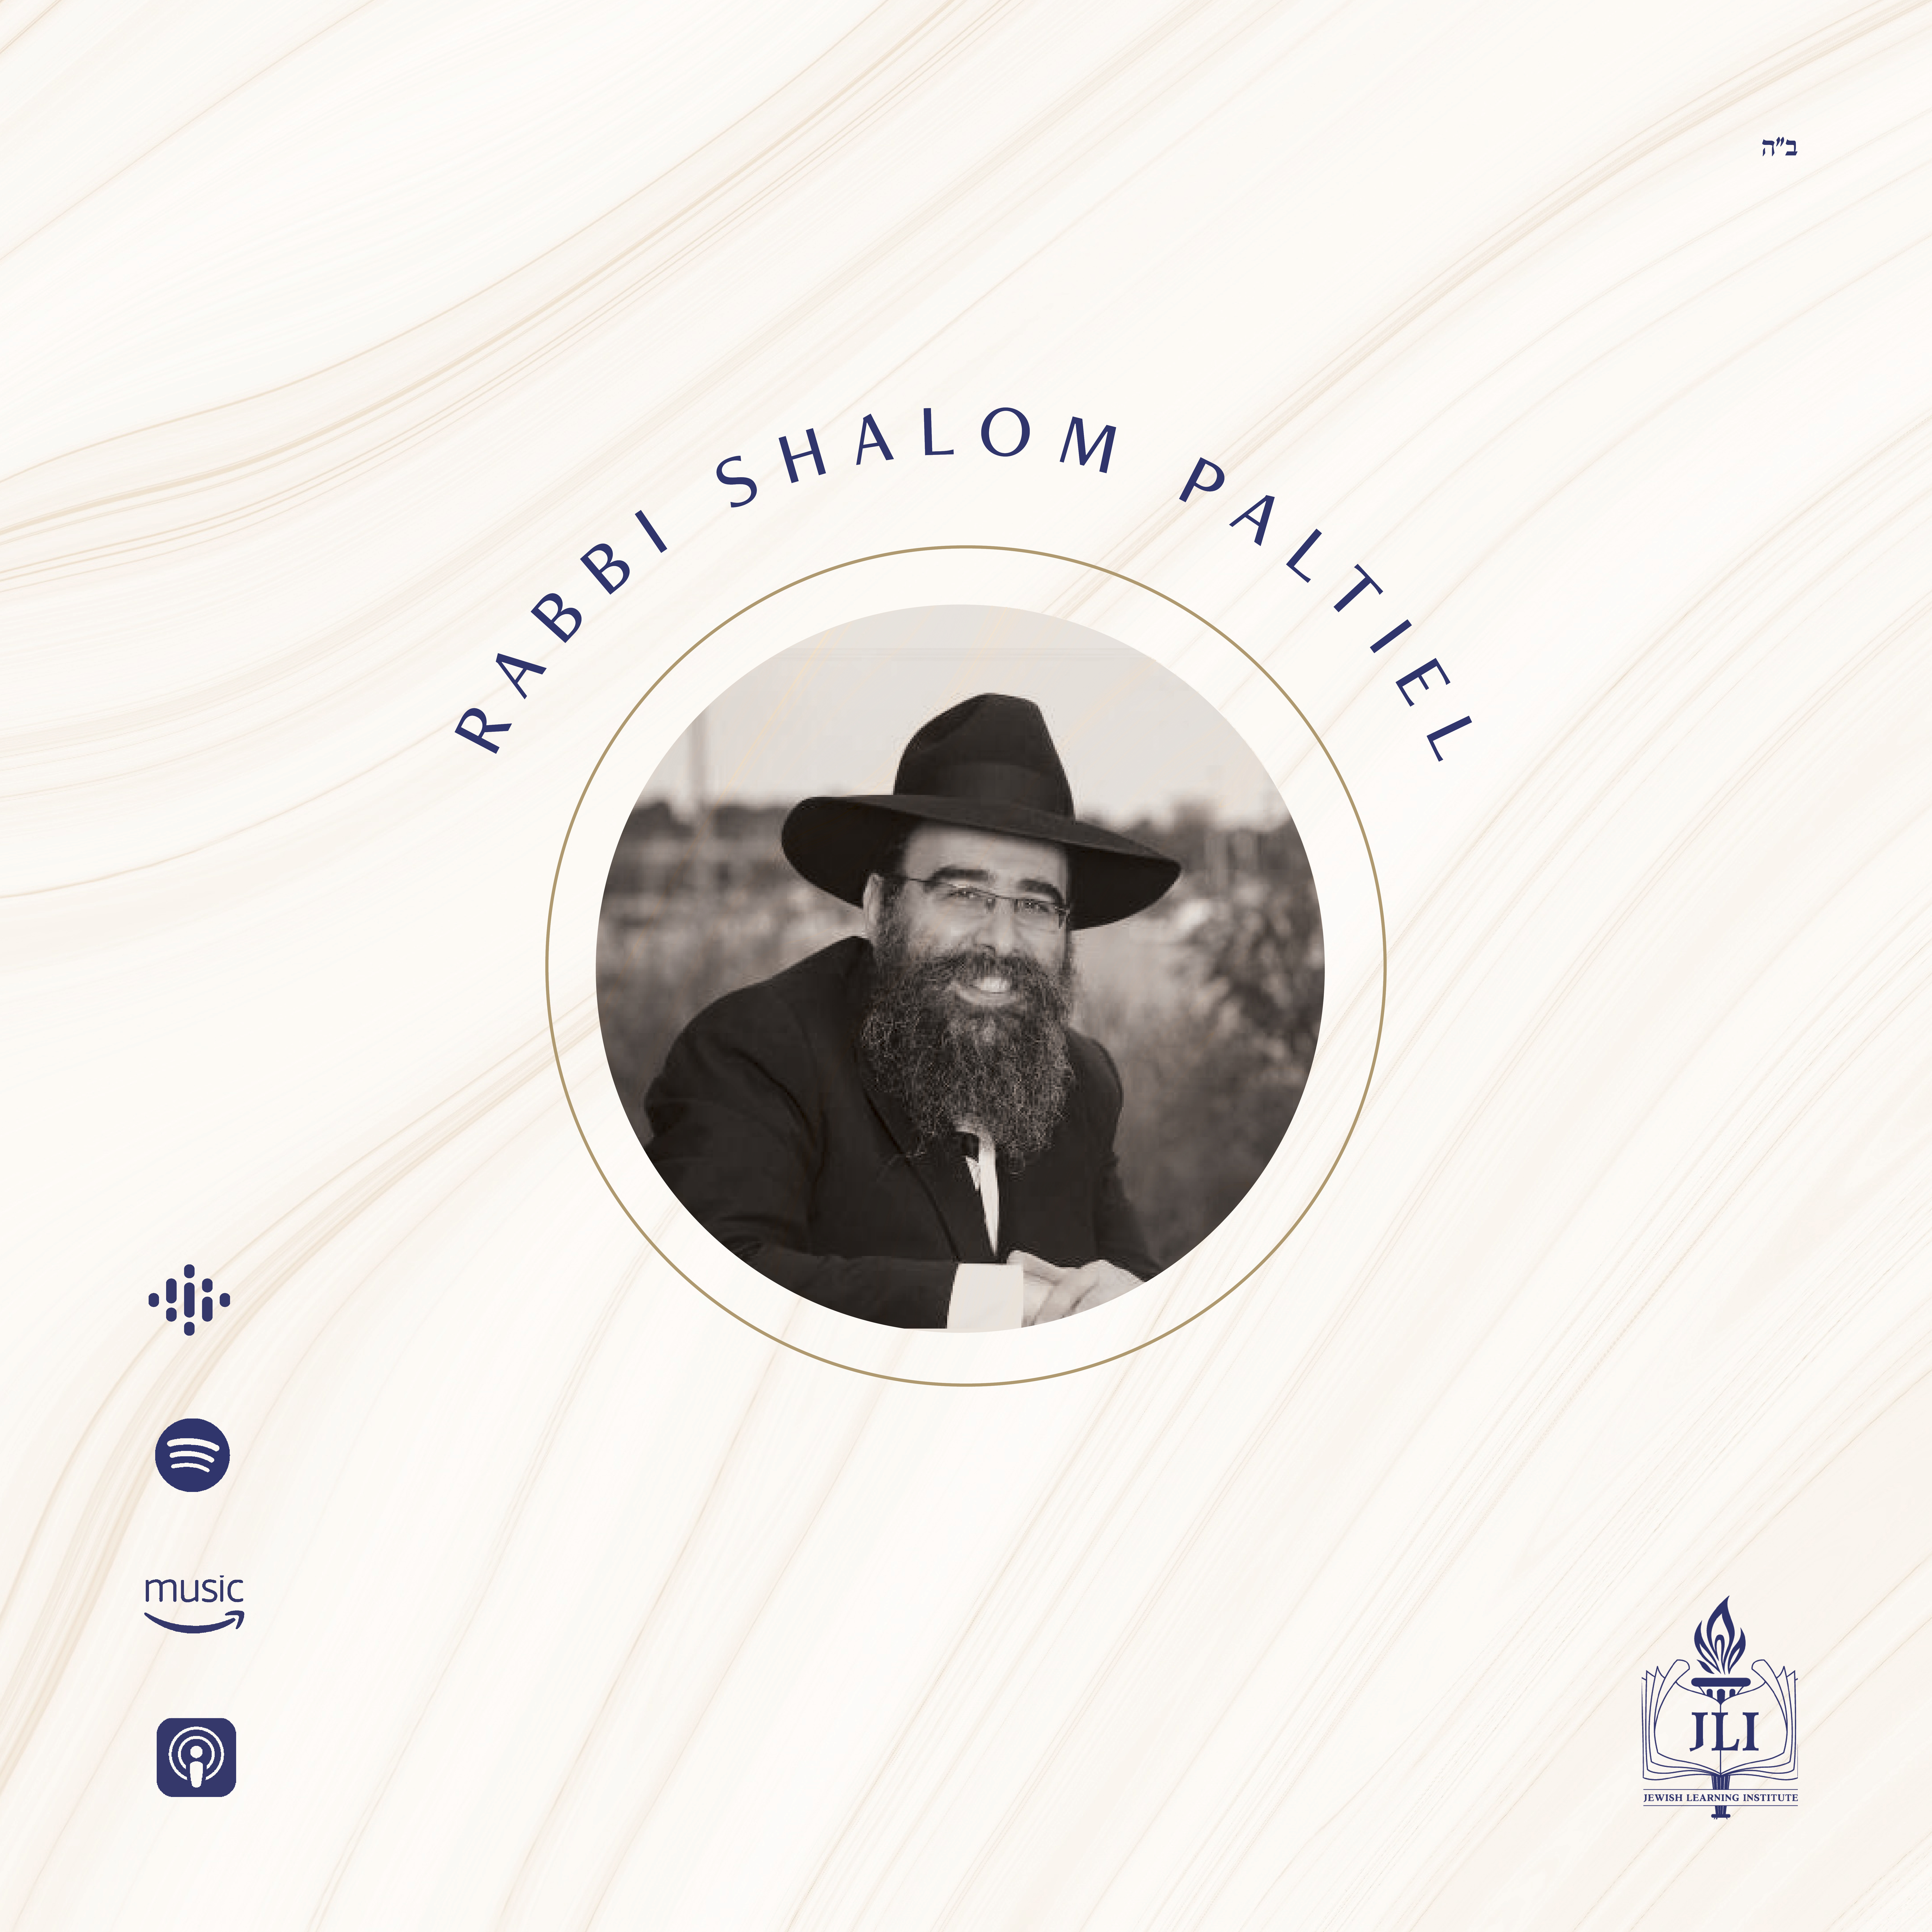 How to Overcome Fear and Instill Self-Confidence - Rabbi Shalom Paltiel